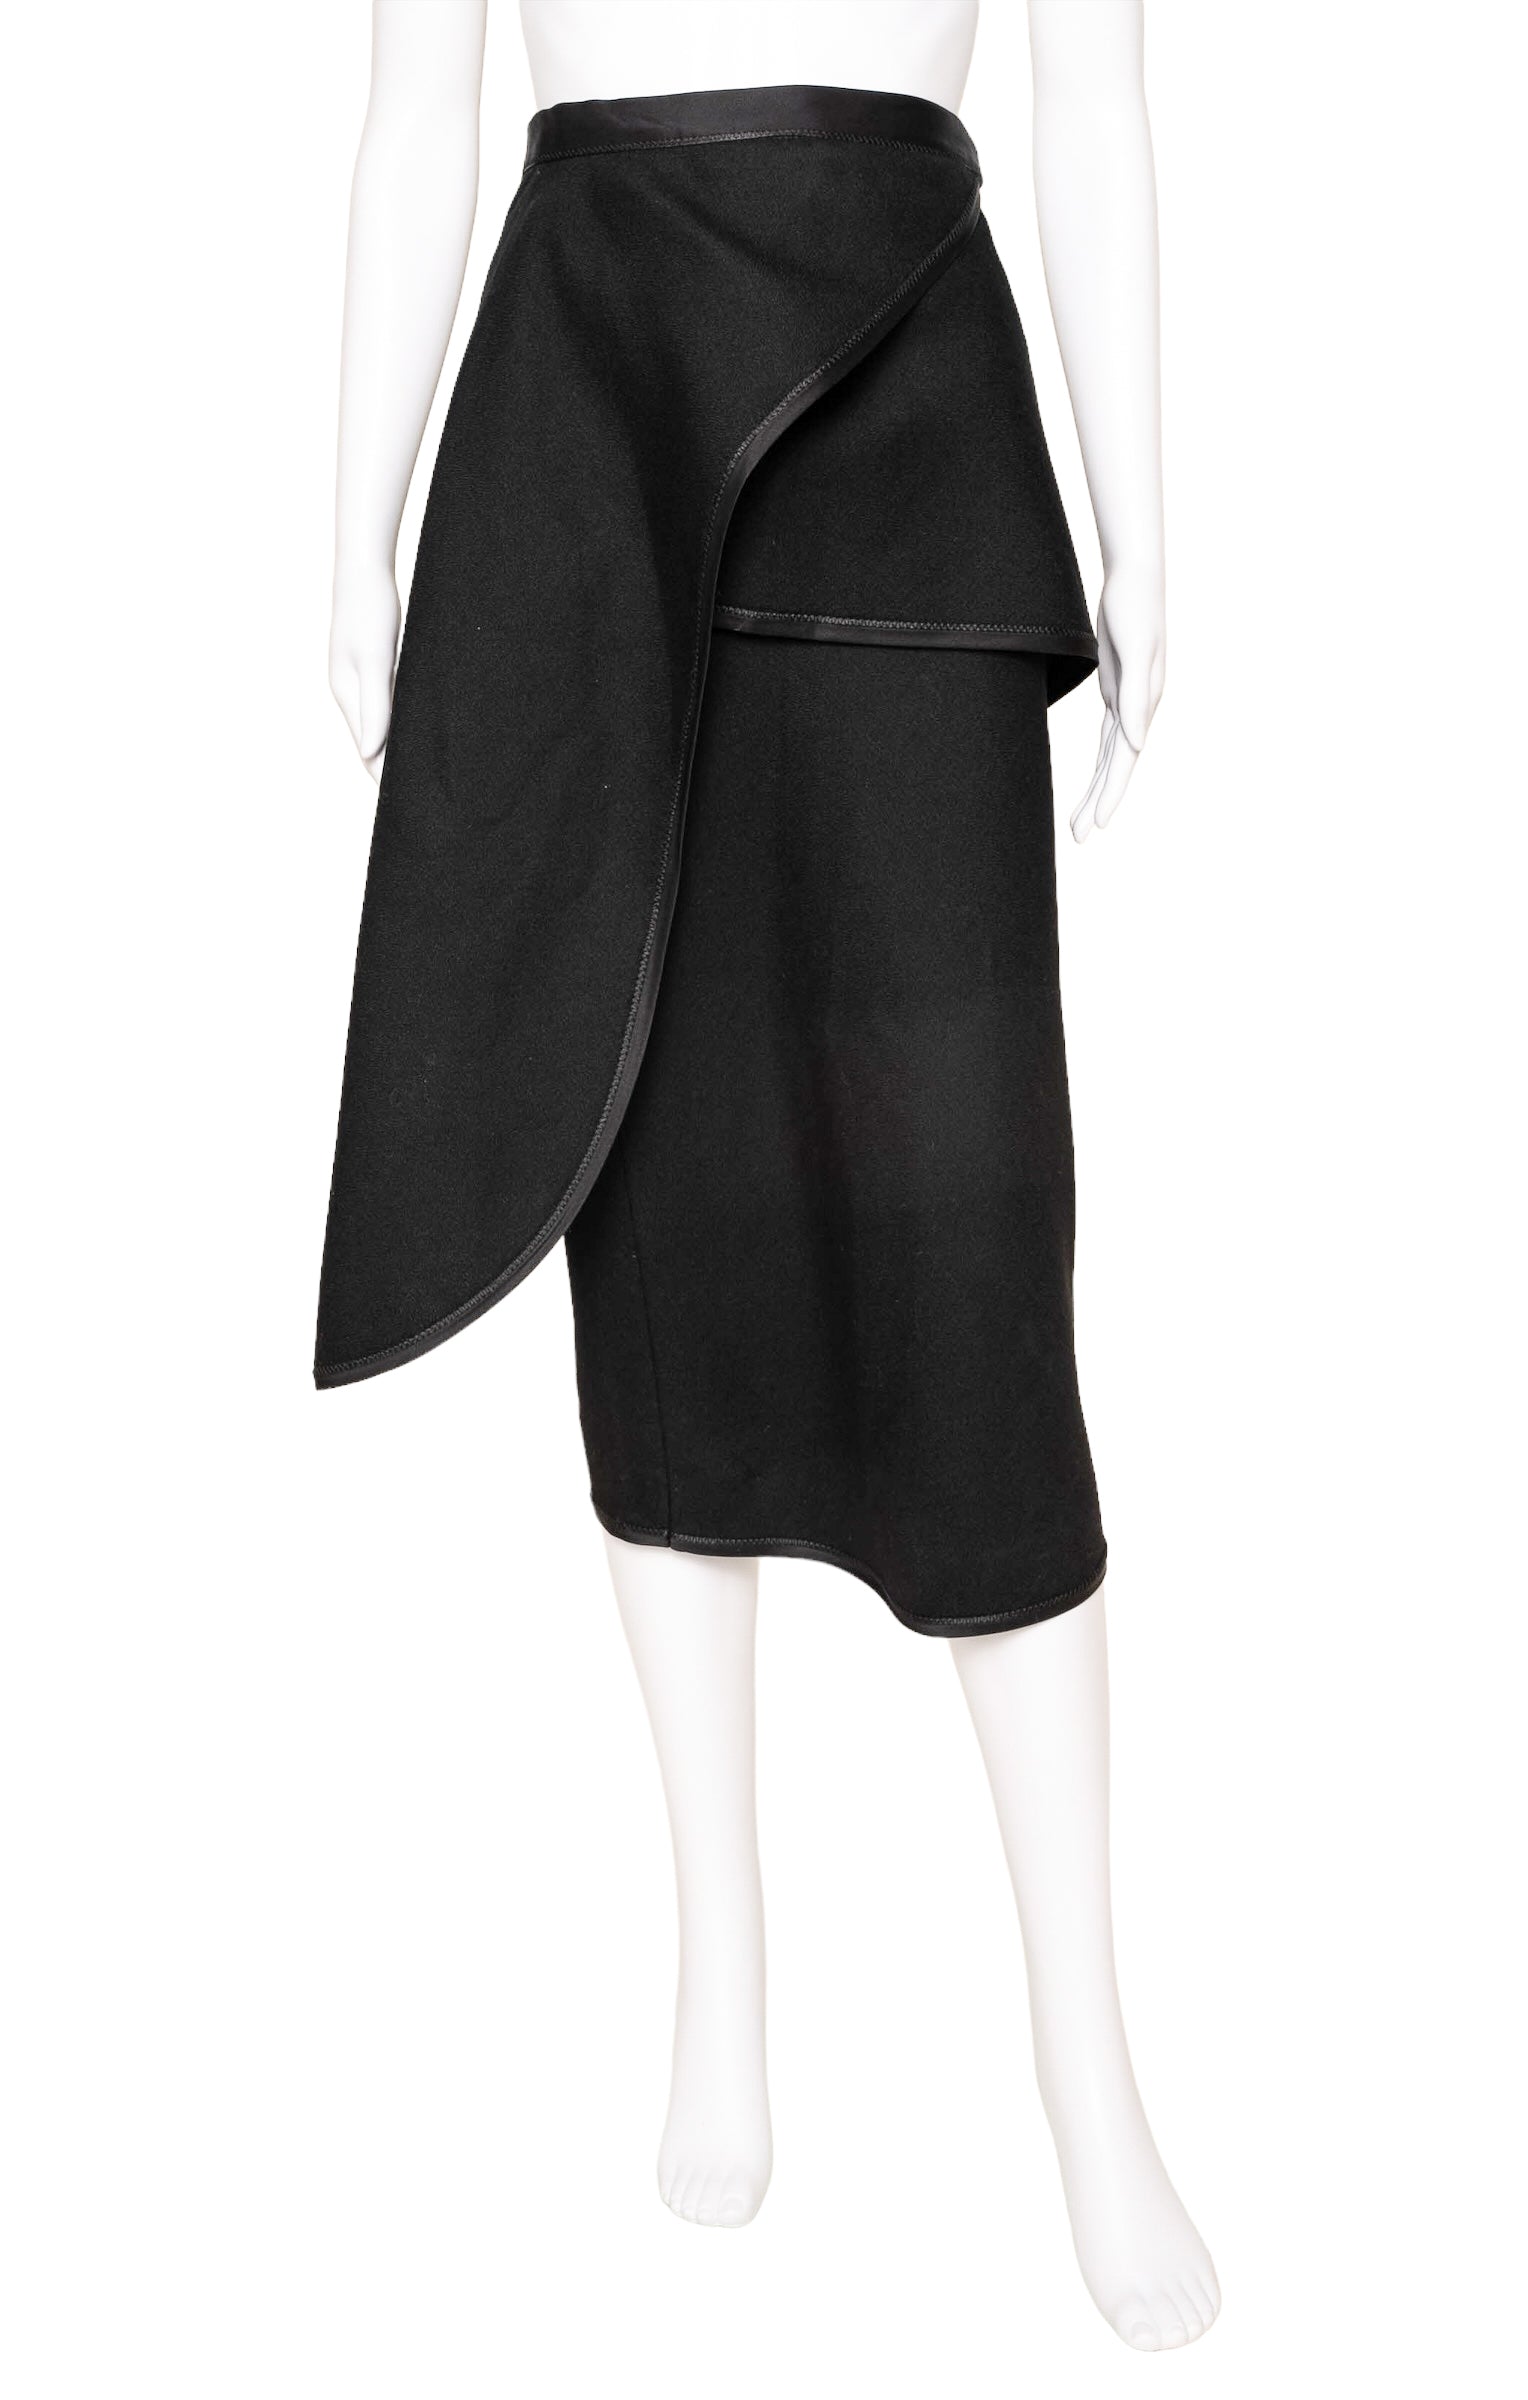 CÉLINE Skirt Size: FR 36 / Comparable to US 2-4